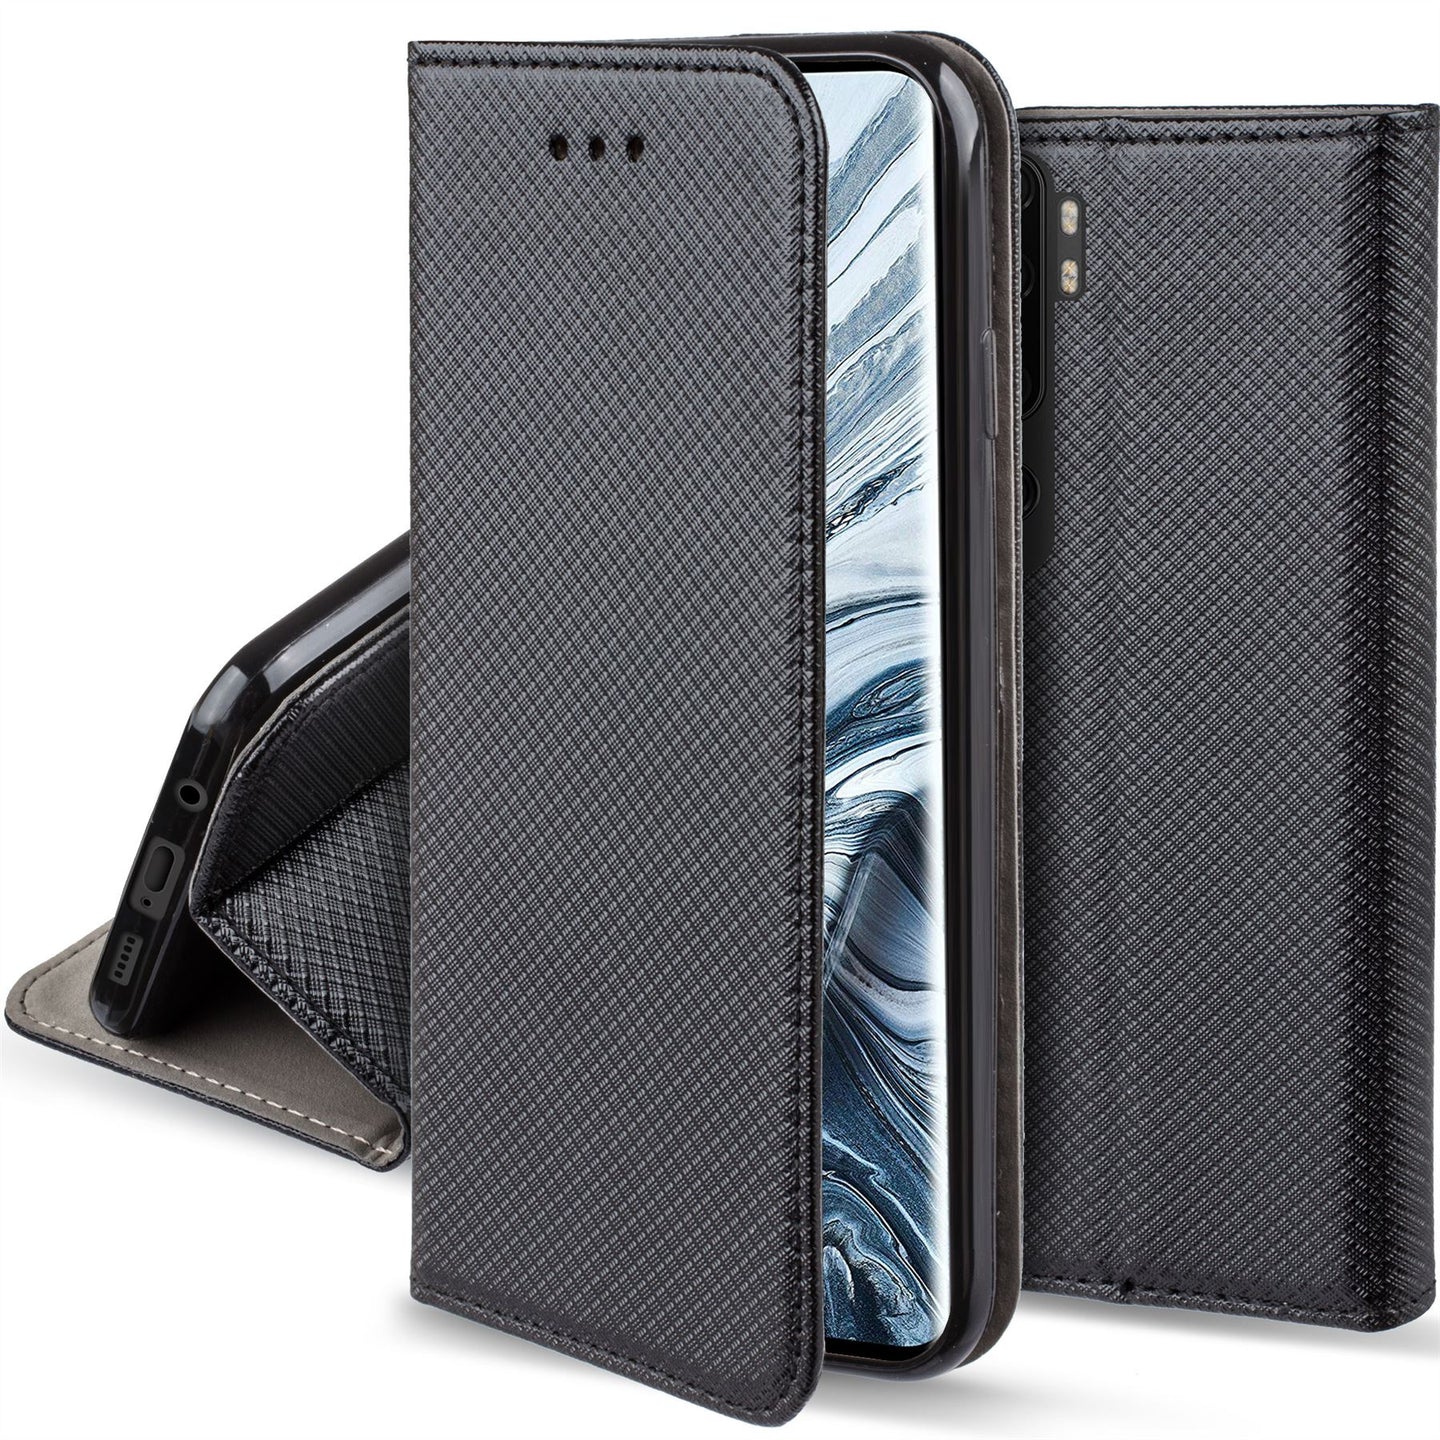 Moozy Case Flip Cover for Xiaomi Mi Note 10, Xiaomi Mi Note 10 Pro, Black - Smart Magnetic Flip Case with Card Holder and Stand